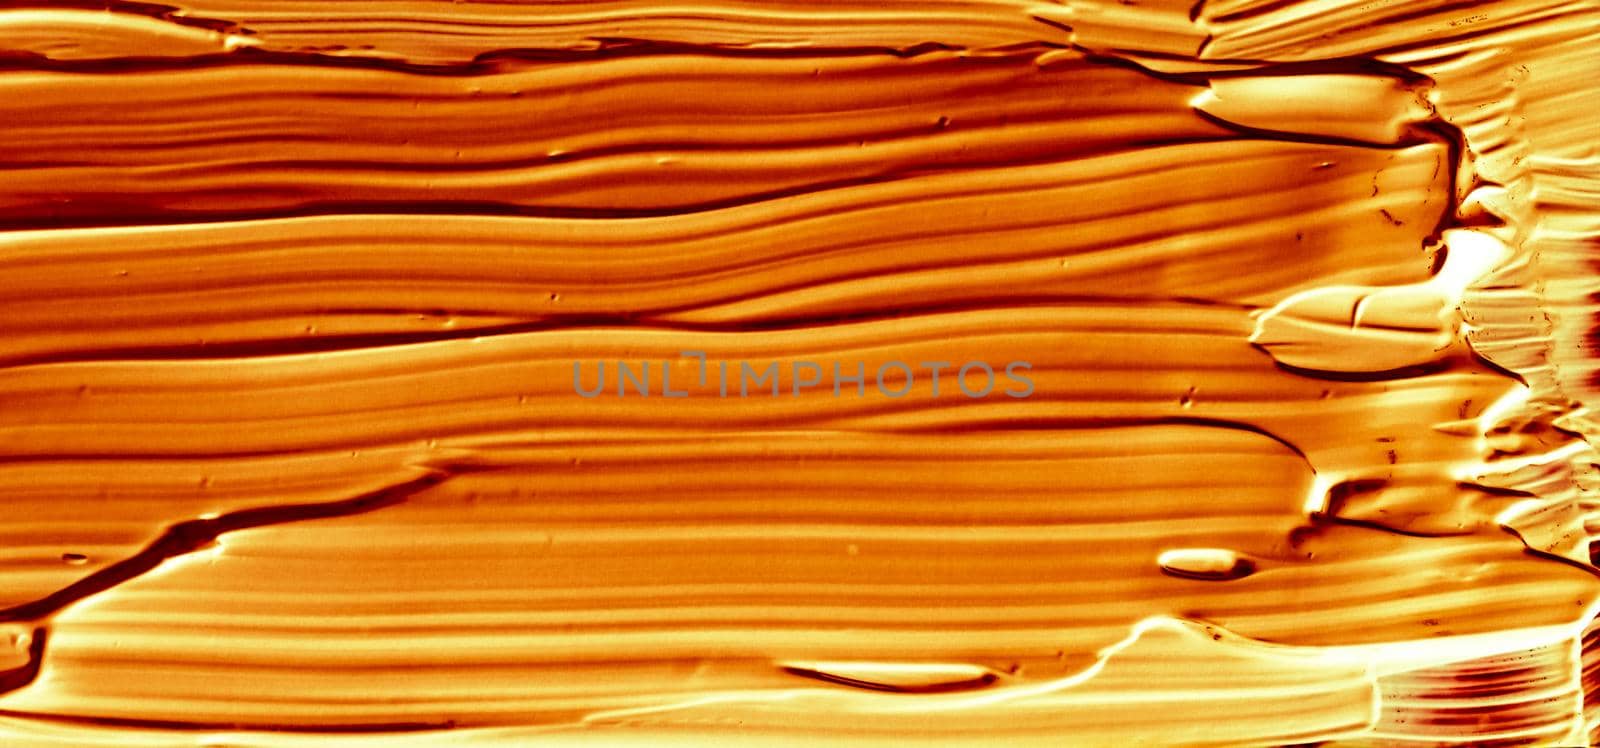 Art abstract, cosmetic product and hand painted design concept - Golden paint brush stroke texture isolated on black background